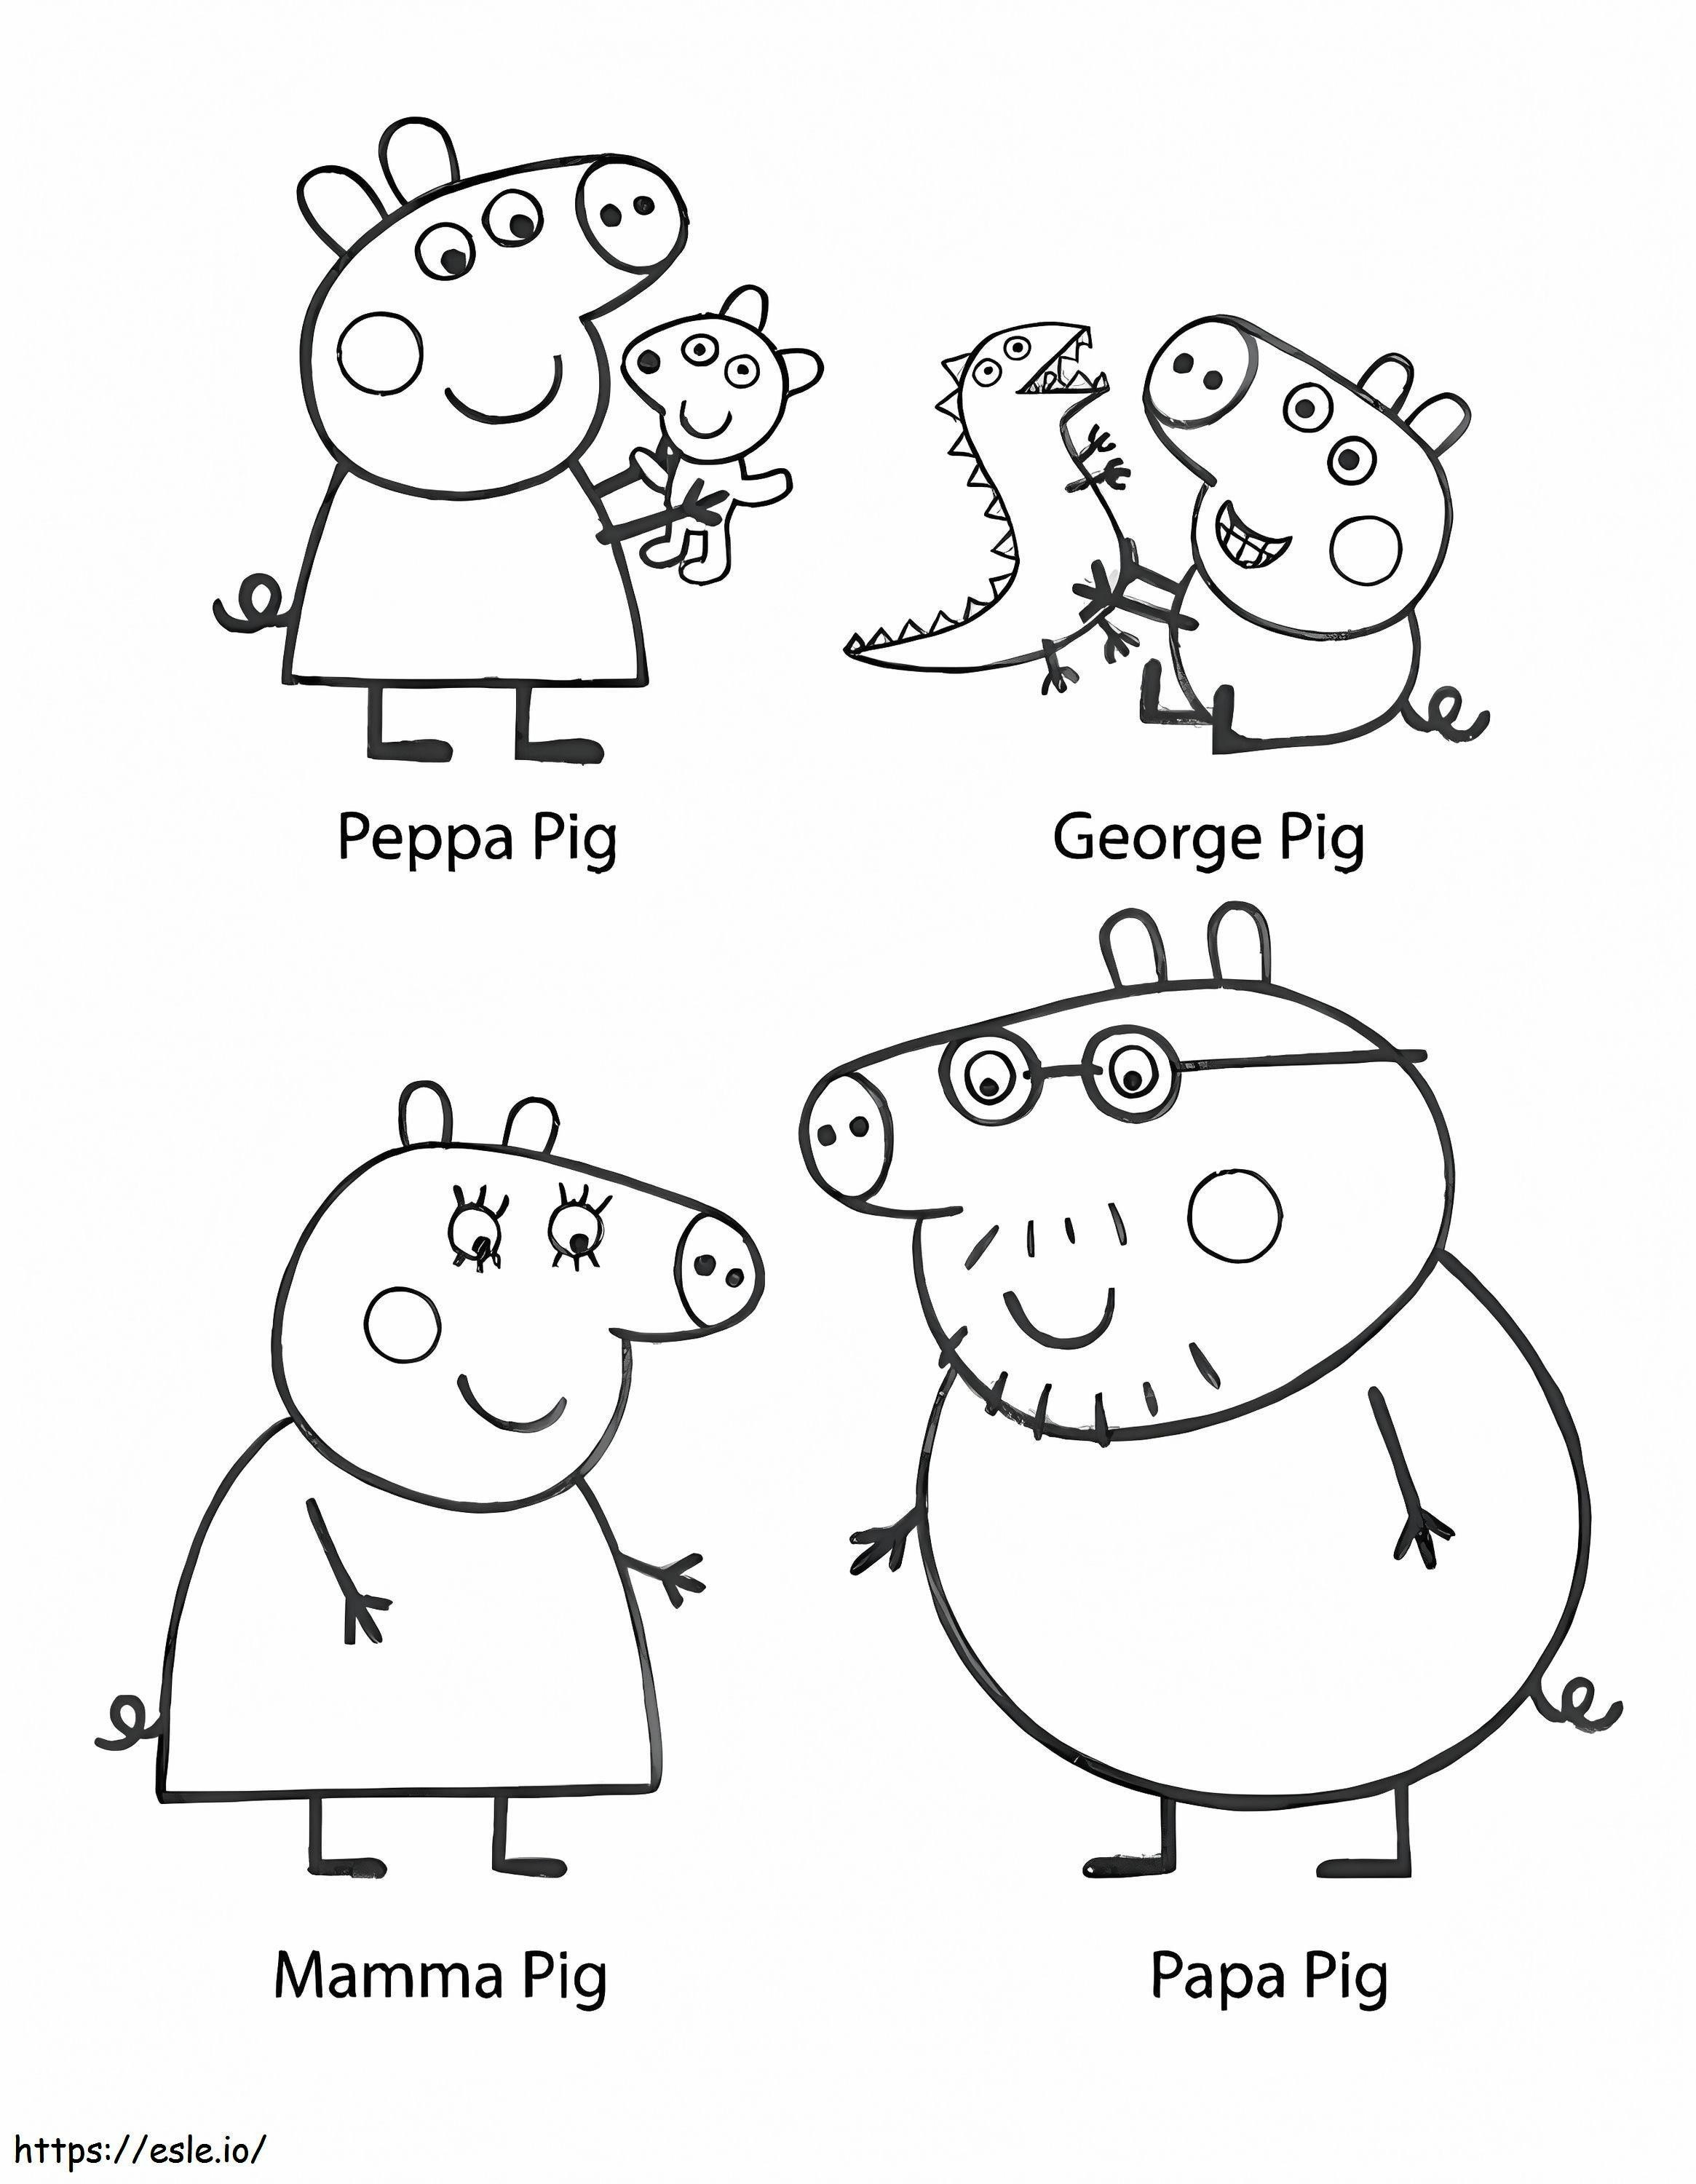 Peppa Pig 9 coloring page